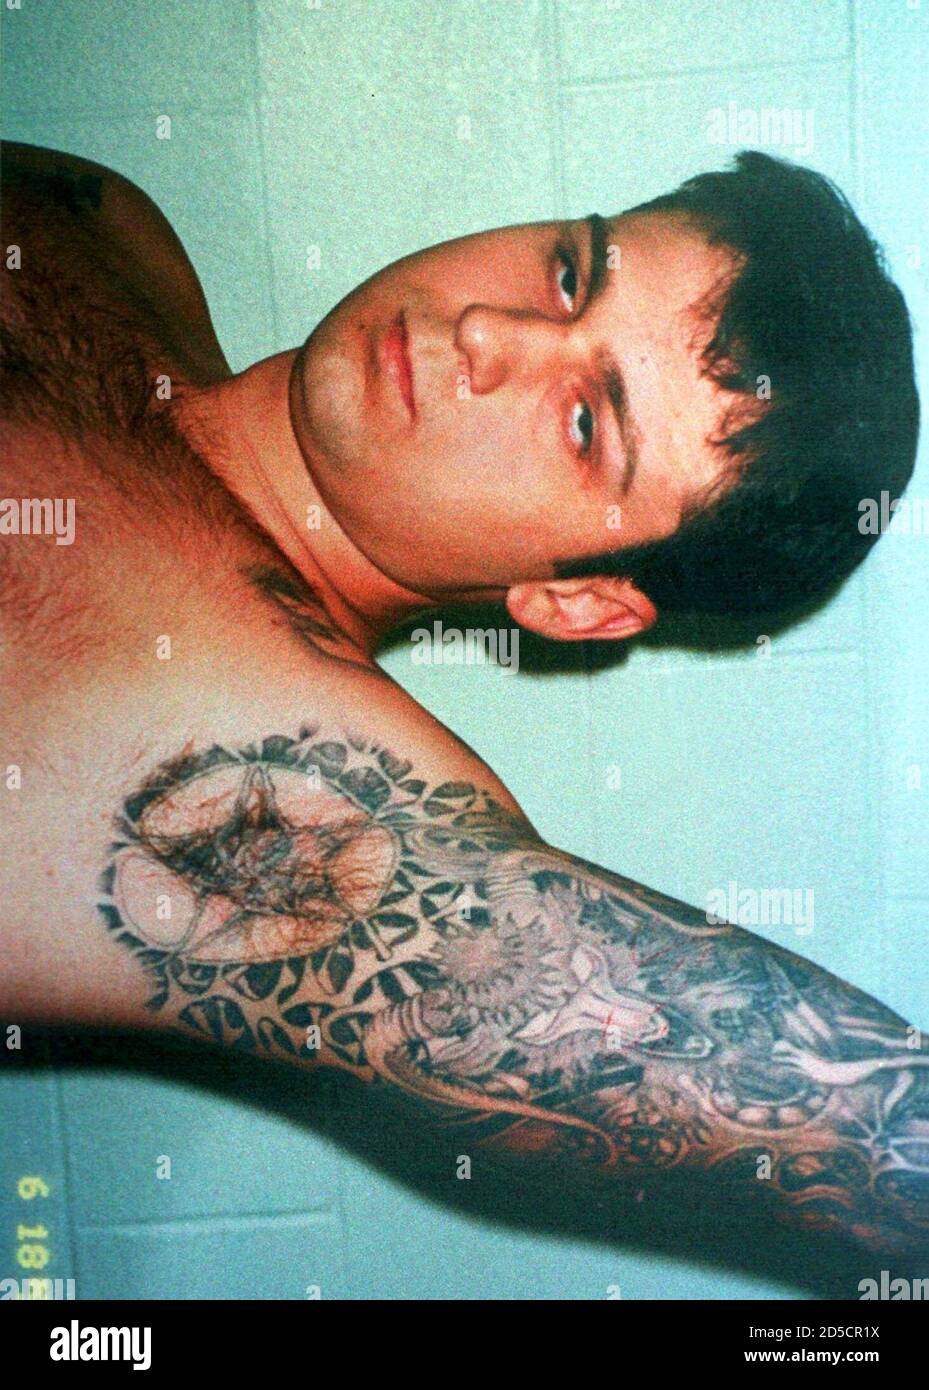 This exhibit, of John William 'Bill' King with tattoos, was entered into evidence February 17 in the capital murder trial against him. King, 24, is accused in the dragging death of James Byrd Jr. eight months ago in Jasper, Texas.  AAL/JDP Stock Photo